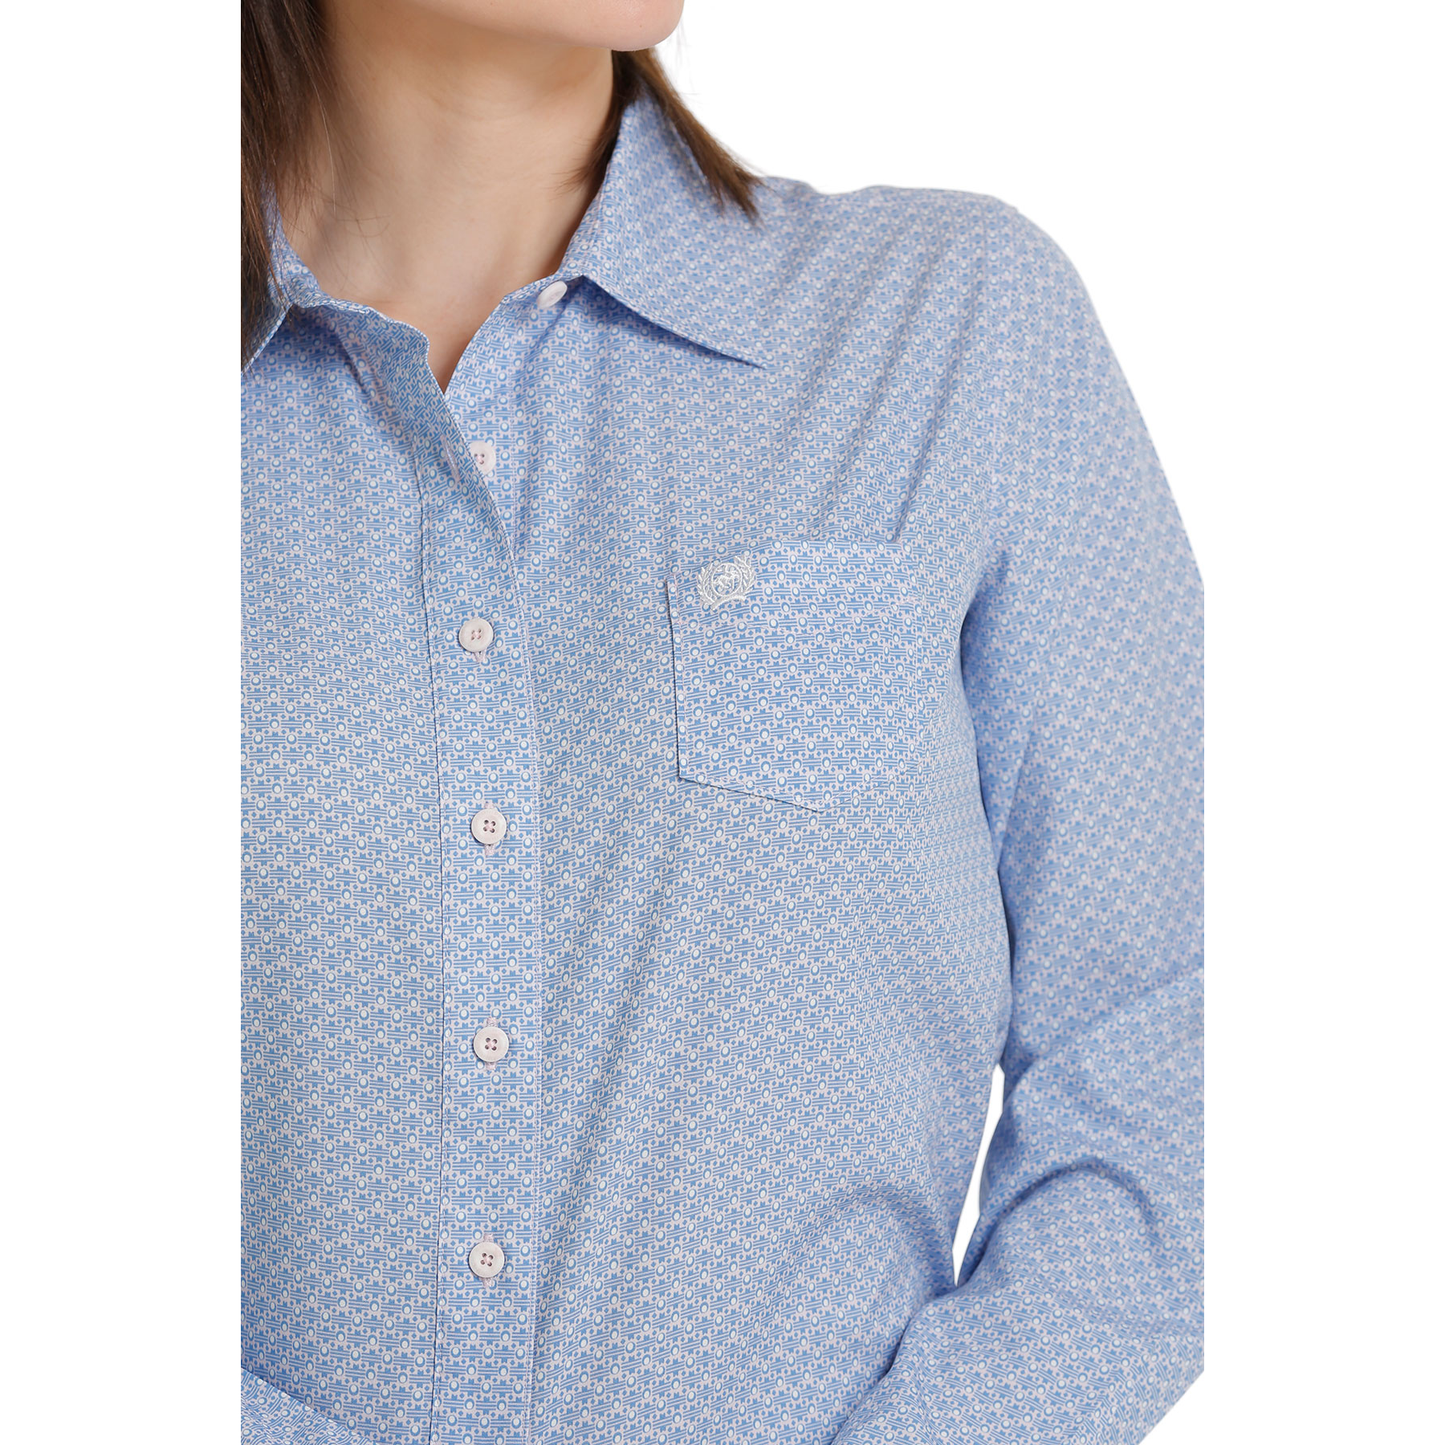 Cinch® Ladies Printed Lilac Button Down Shirt MSW9163013